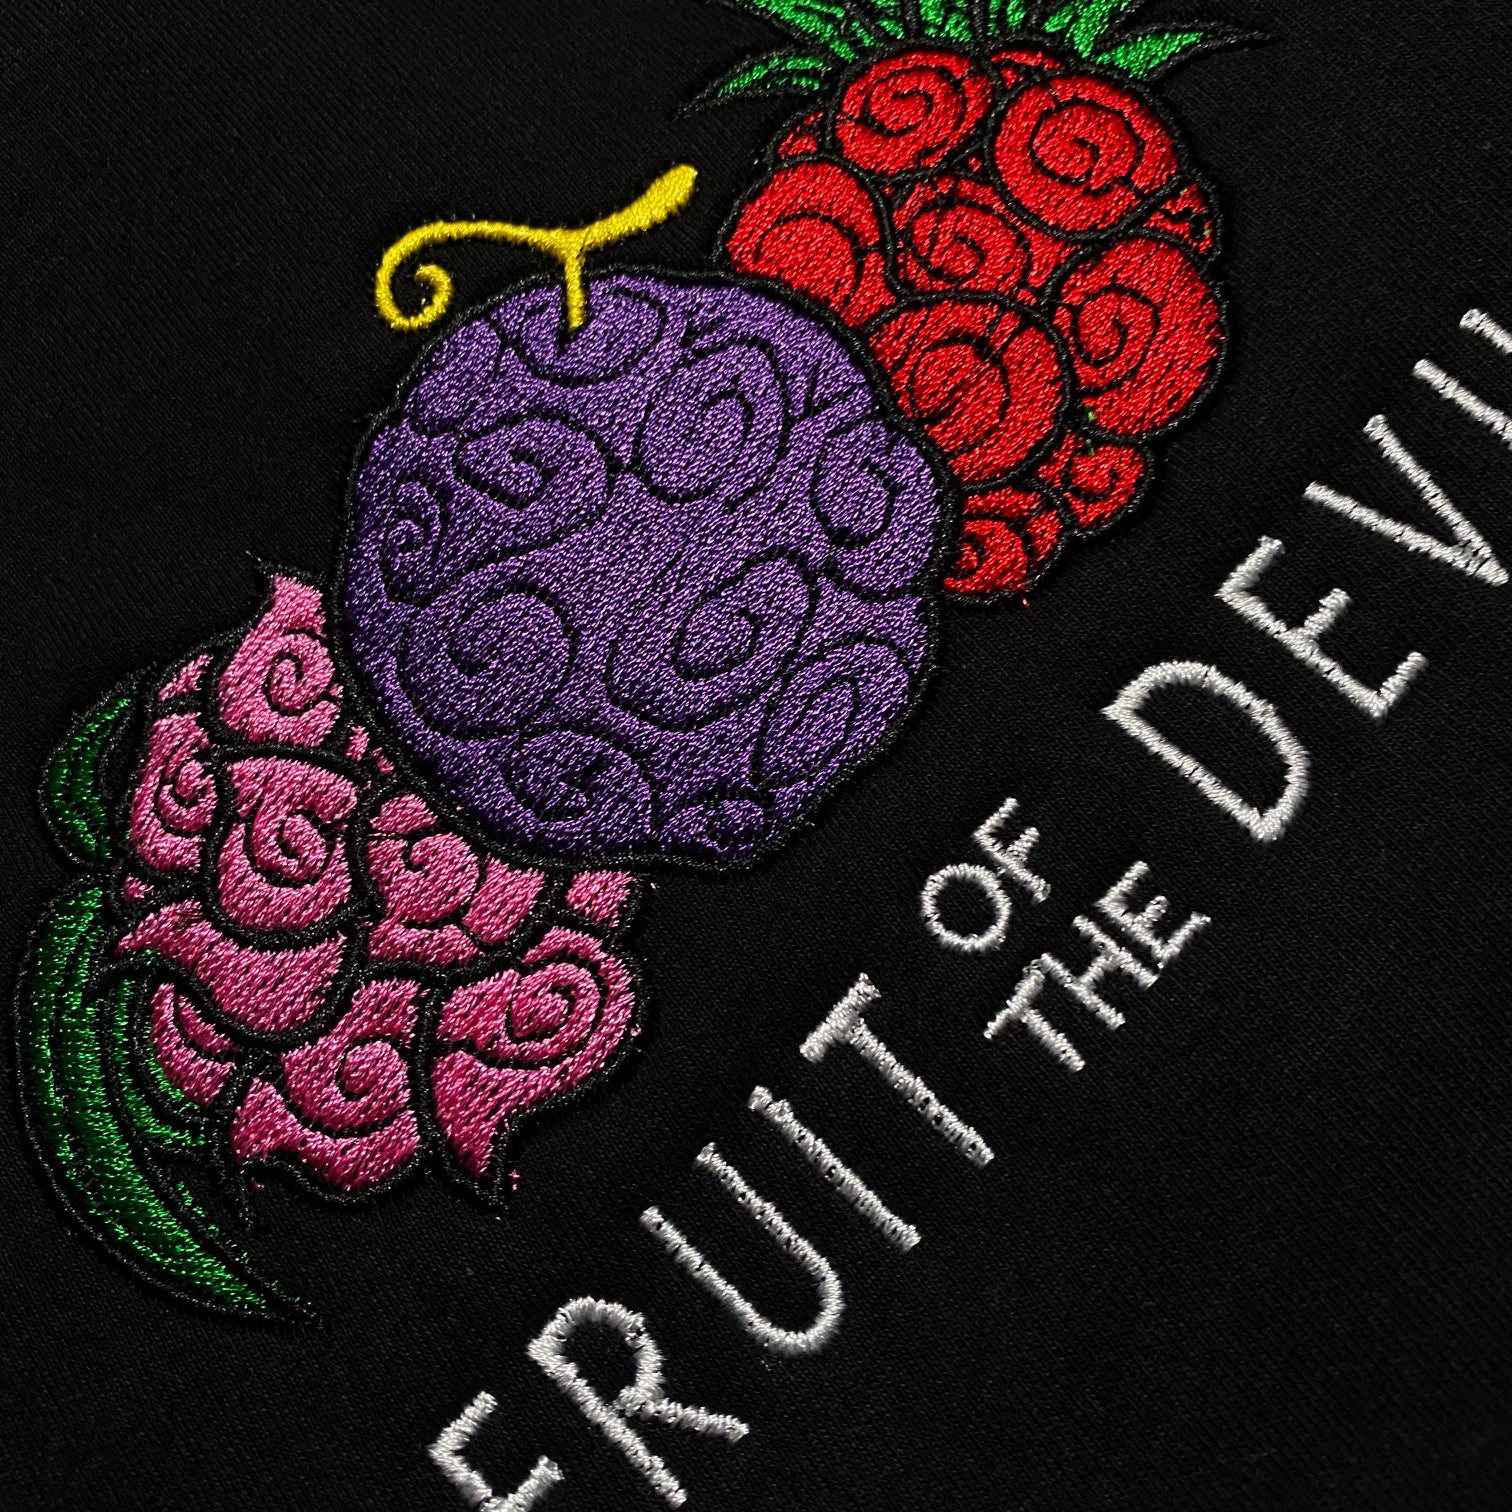 LIMITED Fruit of the Devil EMBROIDERED Gym HOODIE